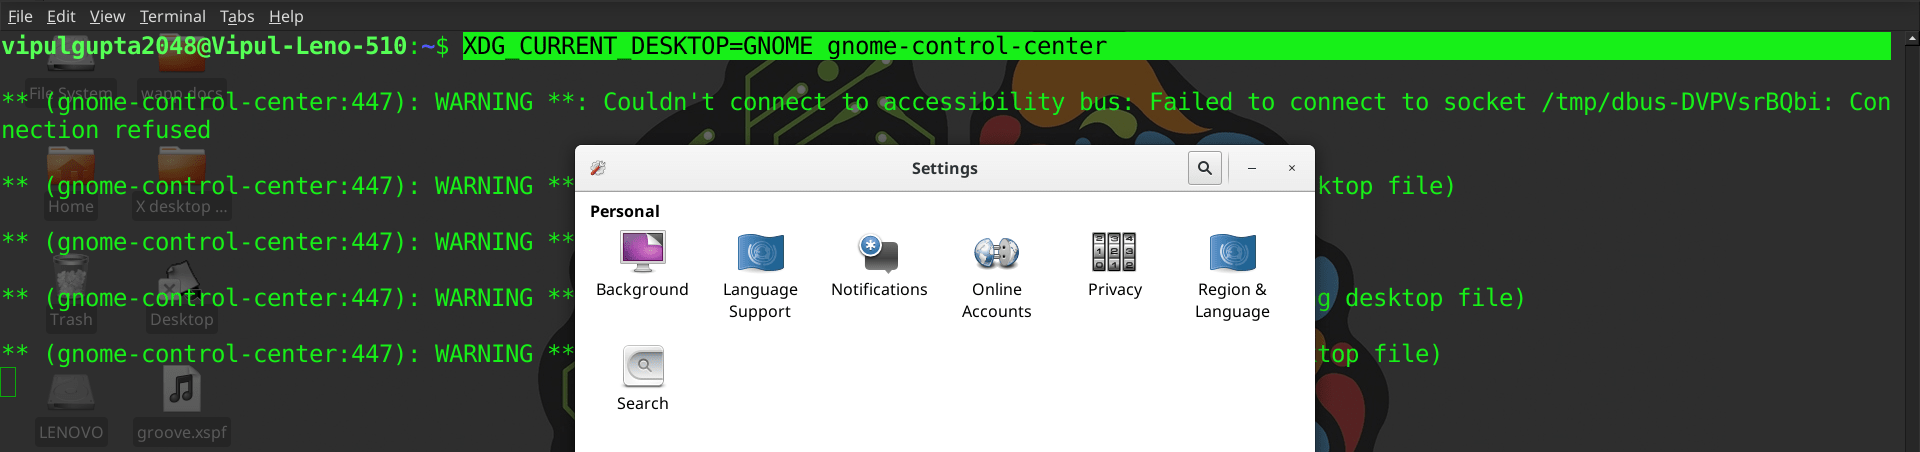 Viewing GNOME control center in XFCE